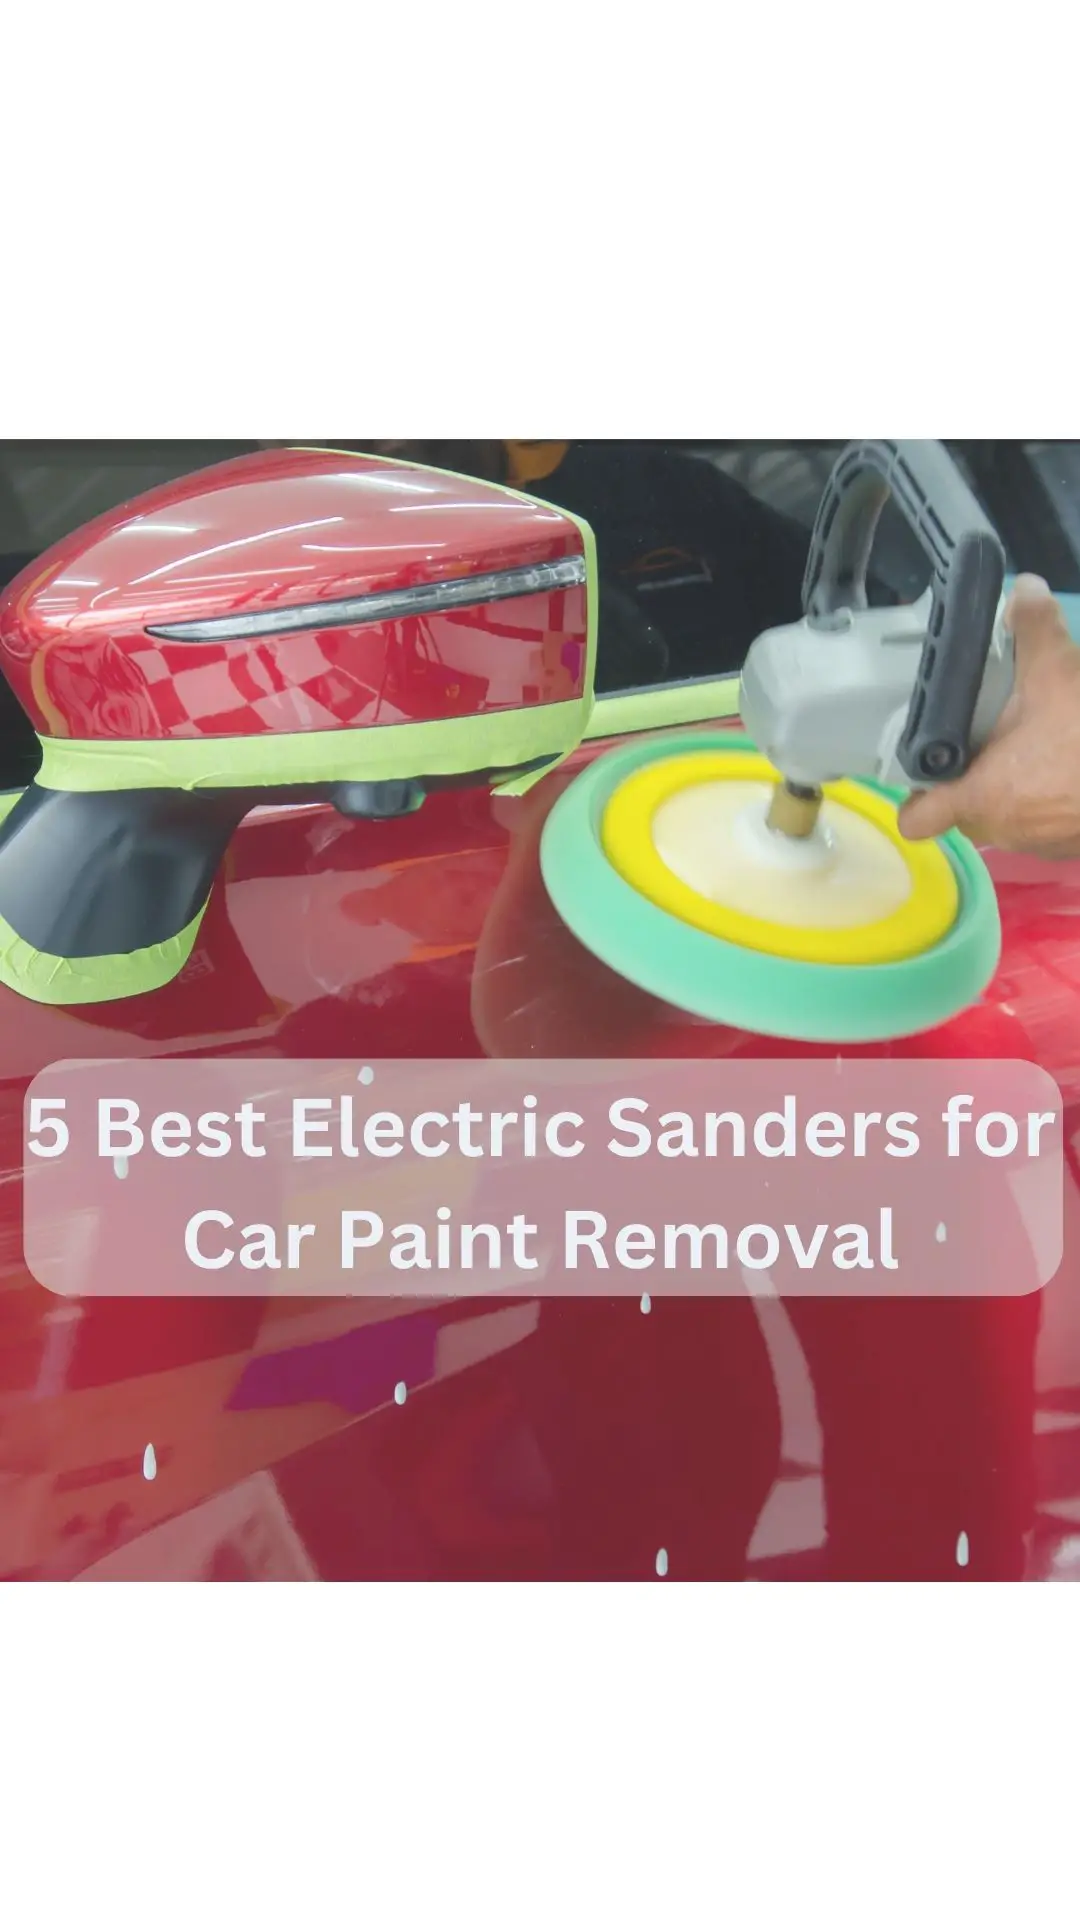 Best Electric Sanders for Car Paint Removal